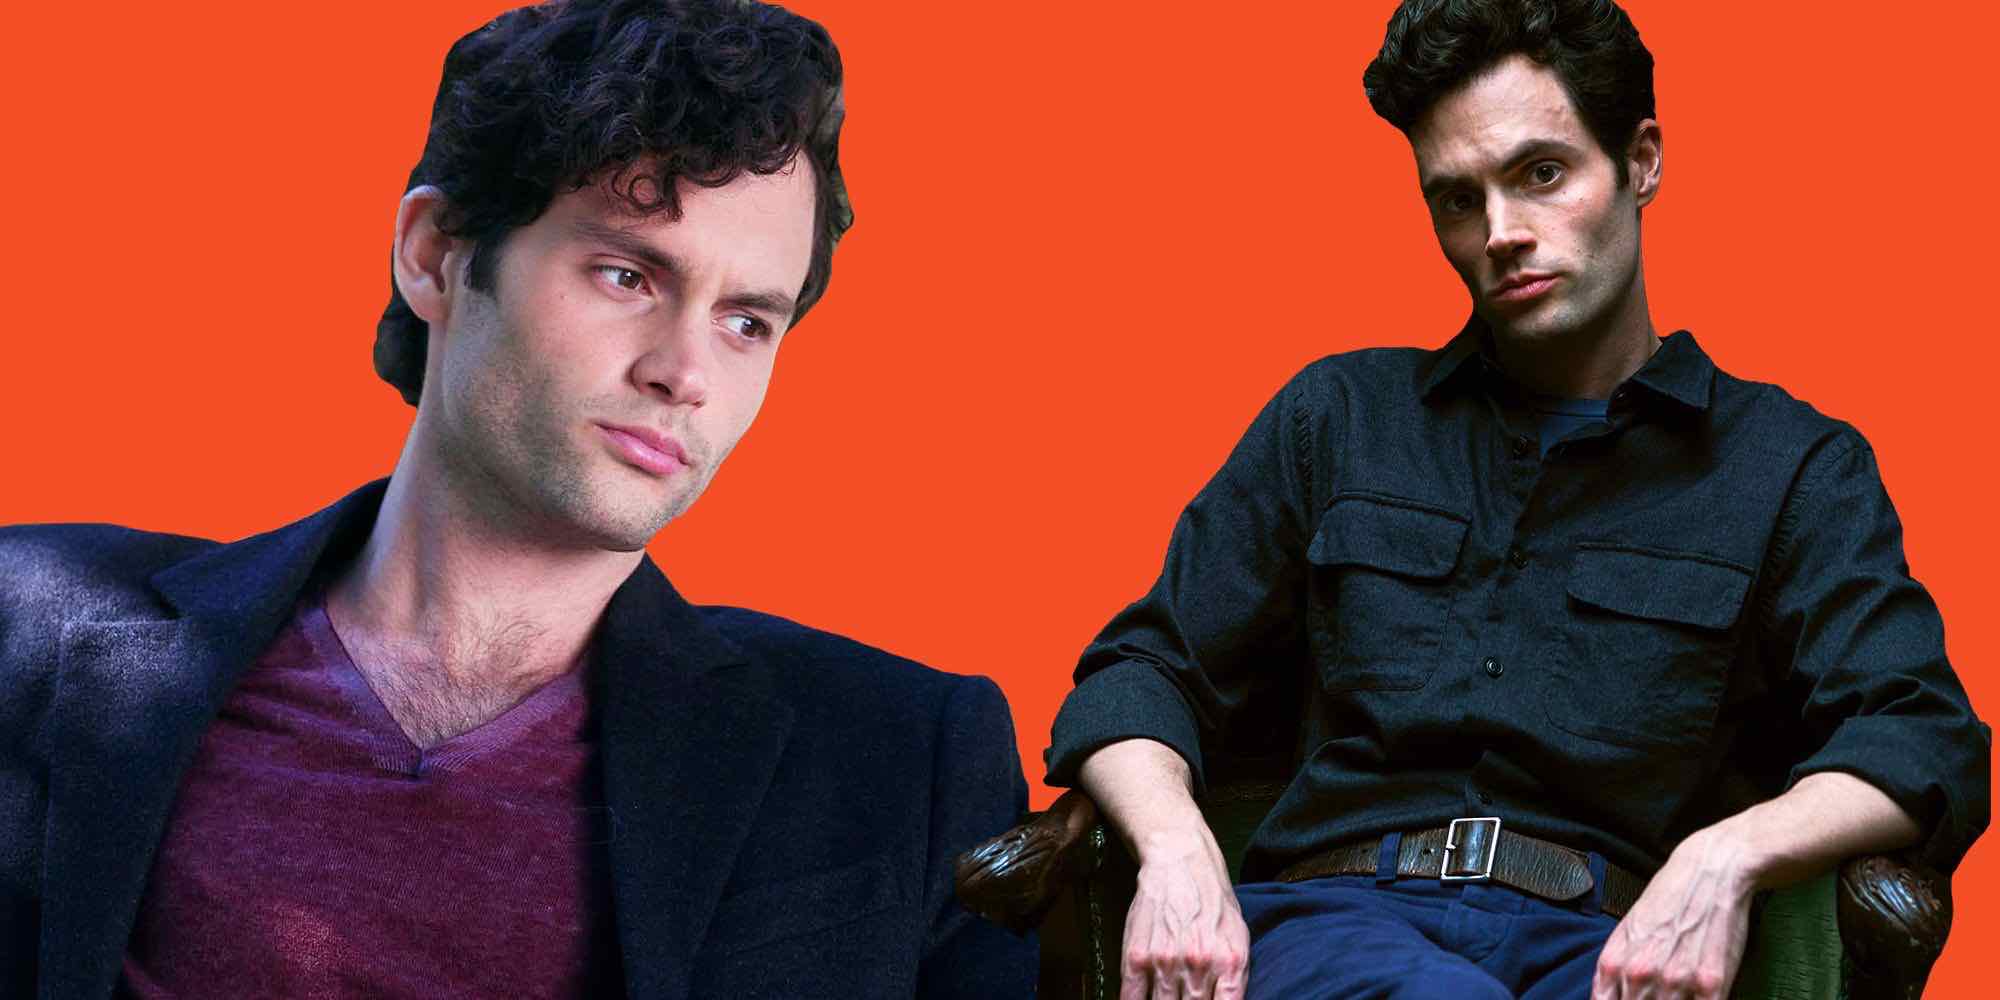 Penn Badgley has starred in both 'Gossip Girl' and 'You'. Read on to discover the eerie, compelling similarities between Joe and Dan.